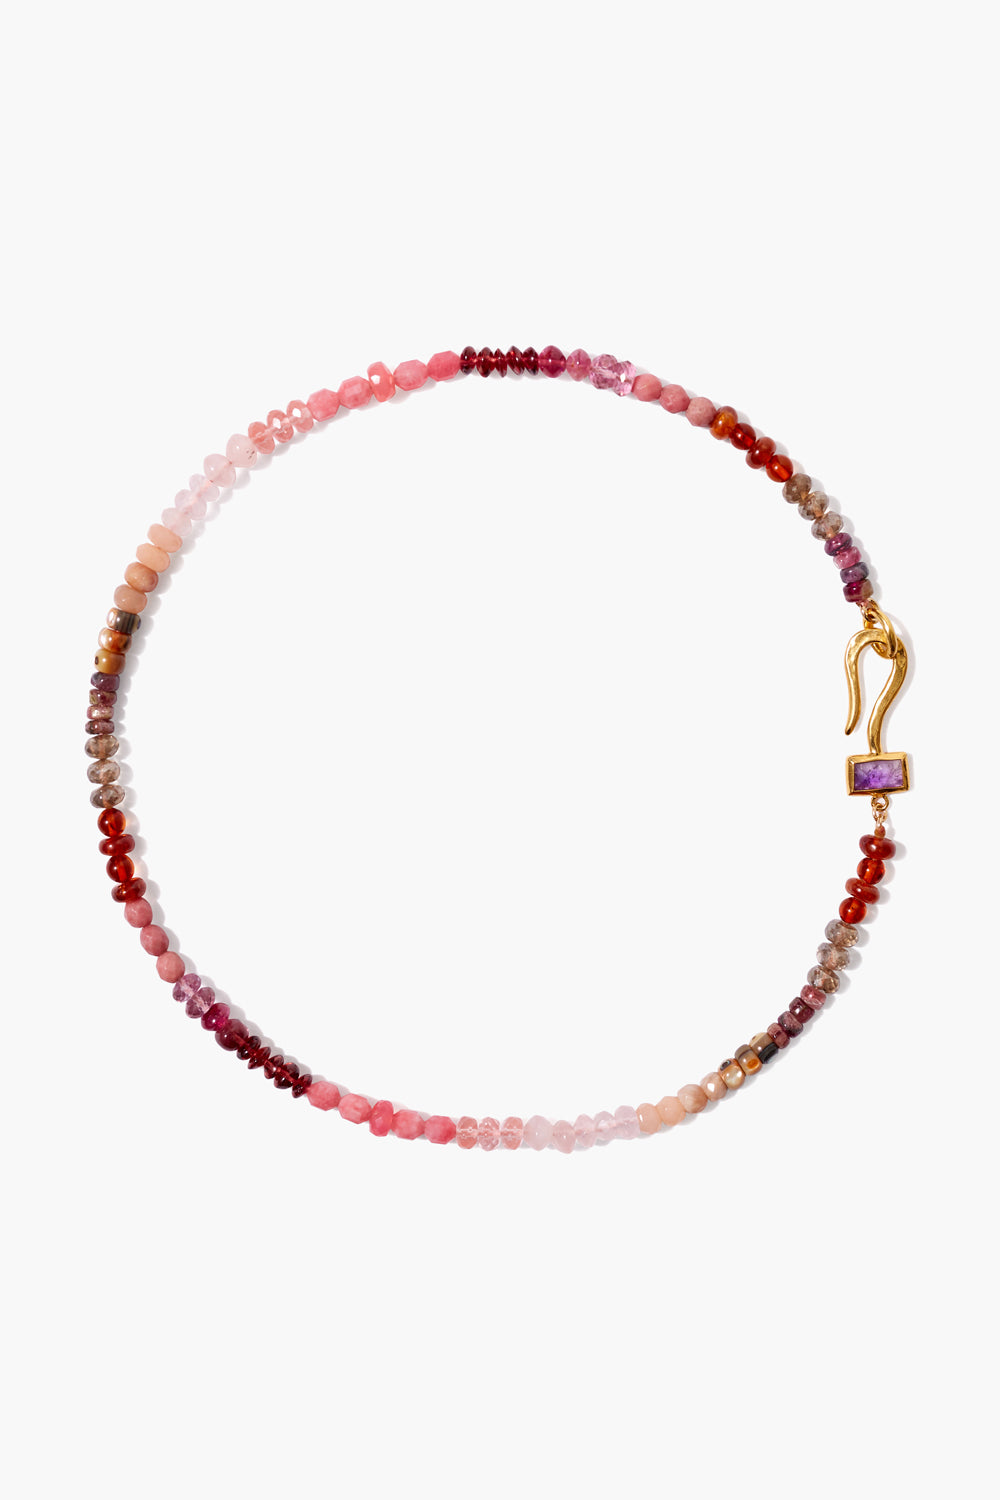 PINK MIX CRYSTAL GOLD NECKLACE - Kingfisher Road - Online Boutique